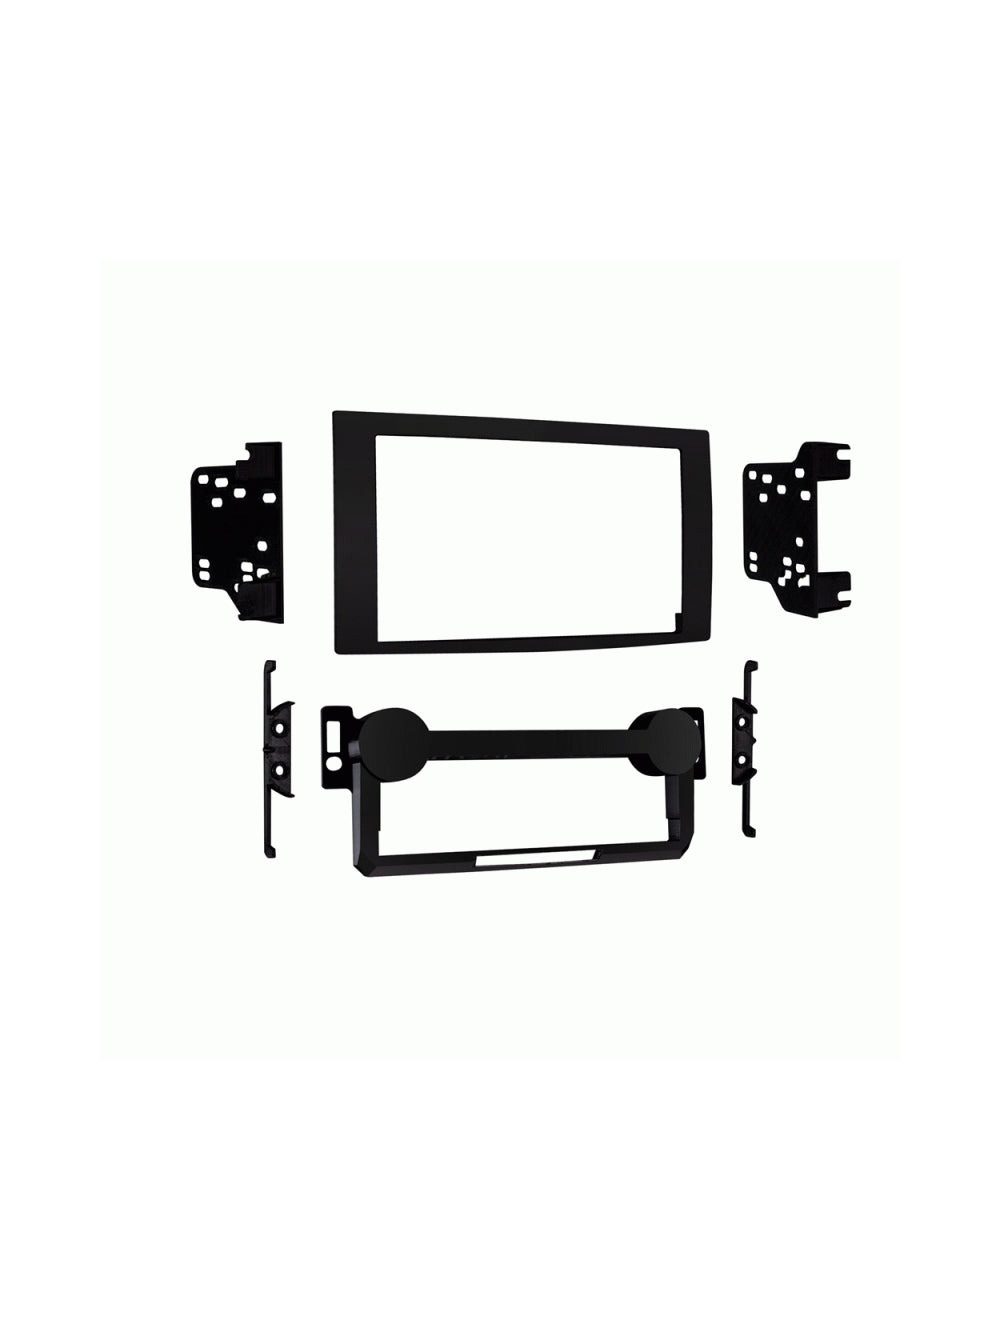 Metra 95-6533B Double DIN Conversion Dash Kit for Select 2004-2010 Chrysler/Dodge/Jeep Vehicles